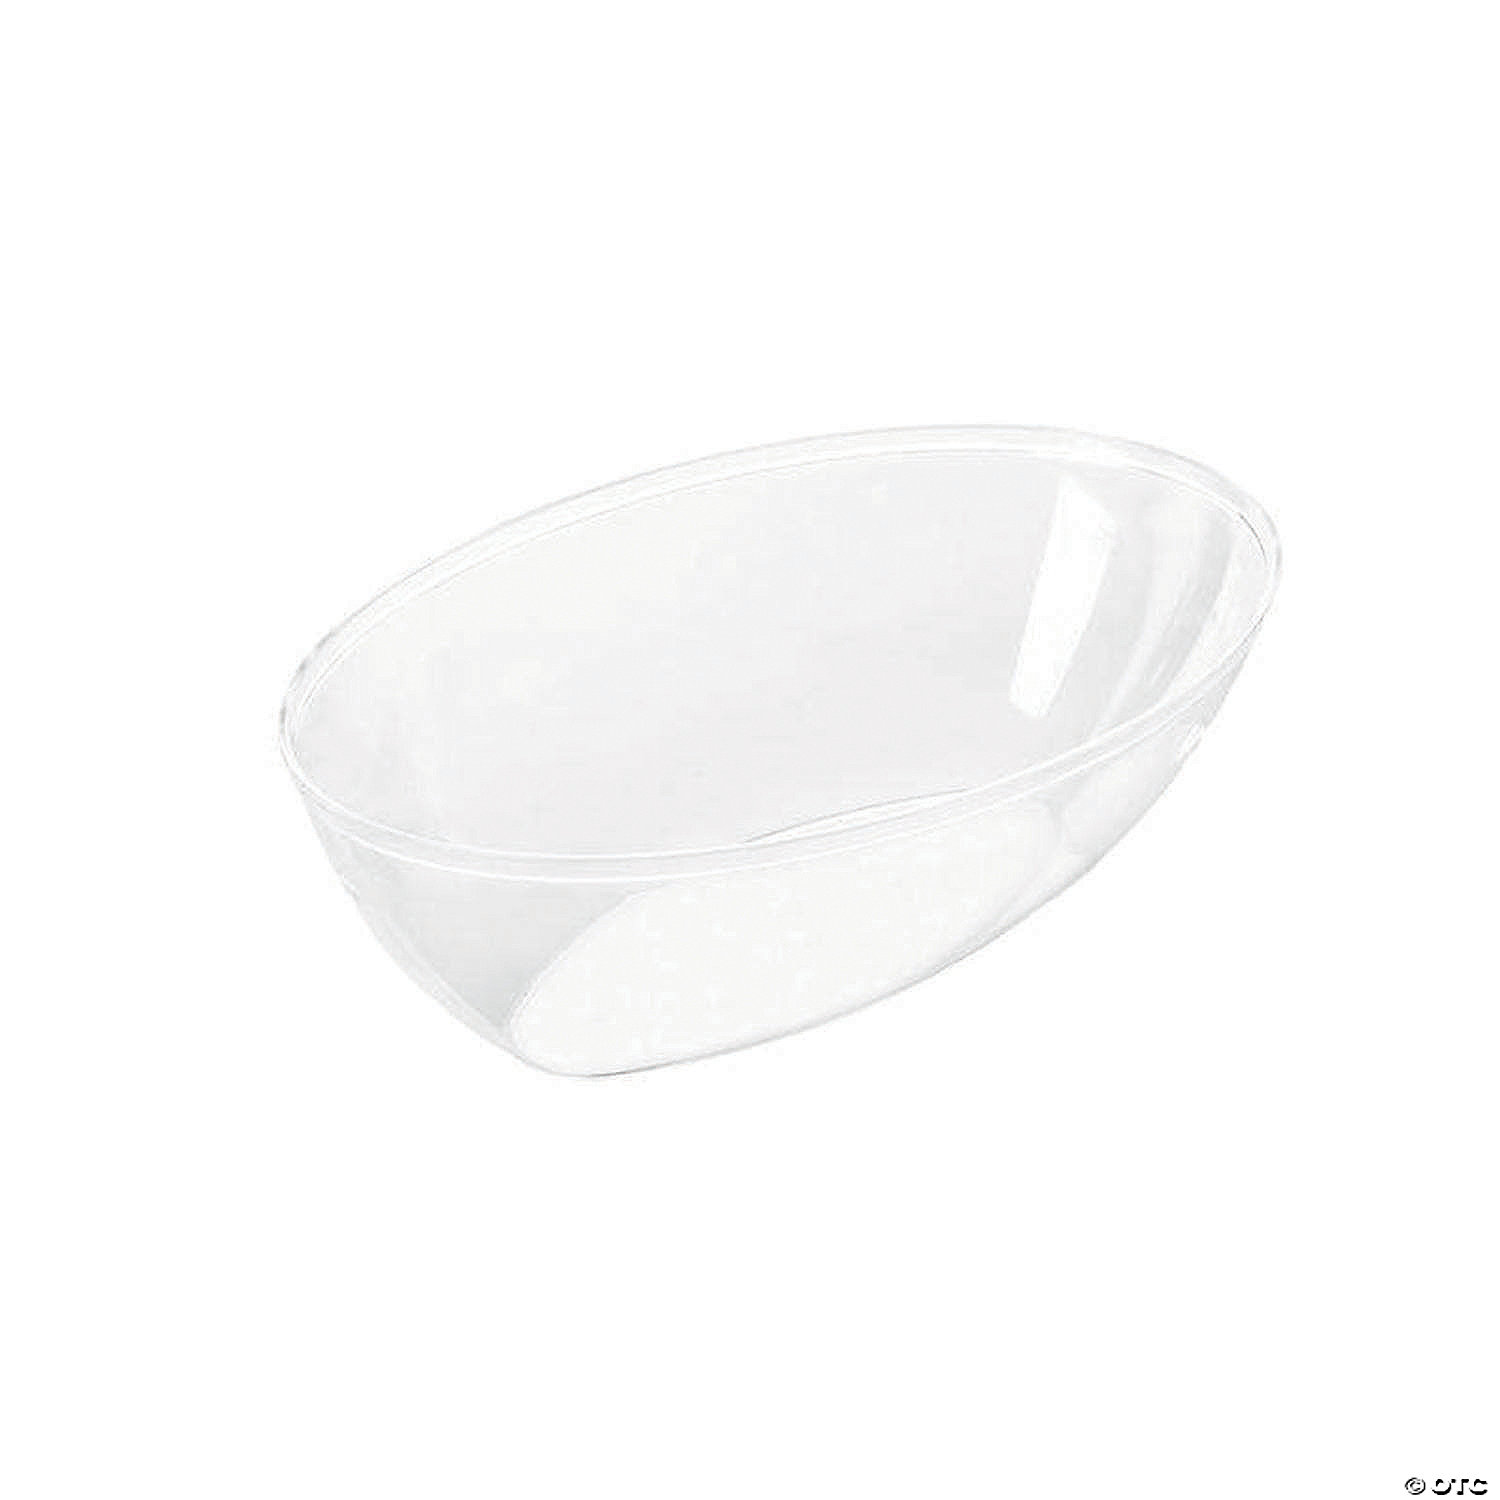 https://s7.orientaltrading.com/is/image/OrientalTrading/VIEWER_ZOOM/premium-2-qt-clear-oval-plastic-serving-bowls-24-bowls~14109046